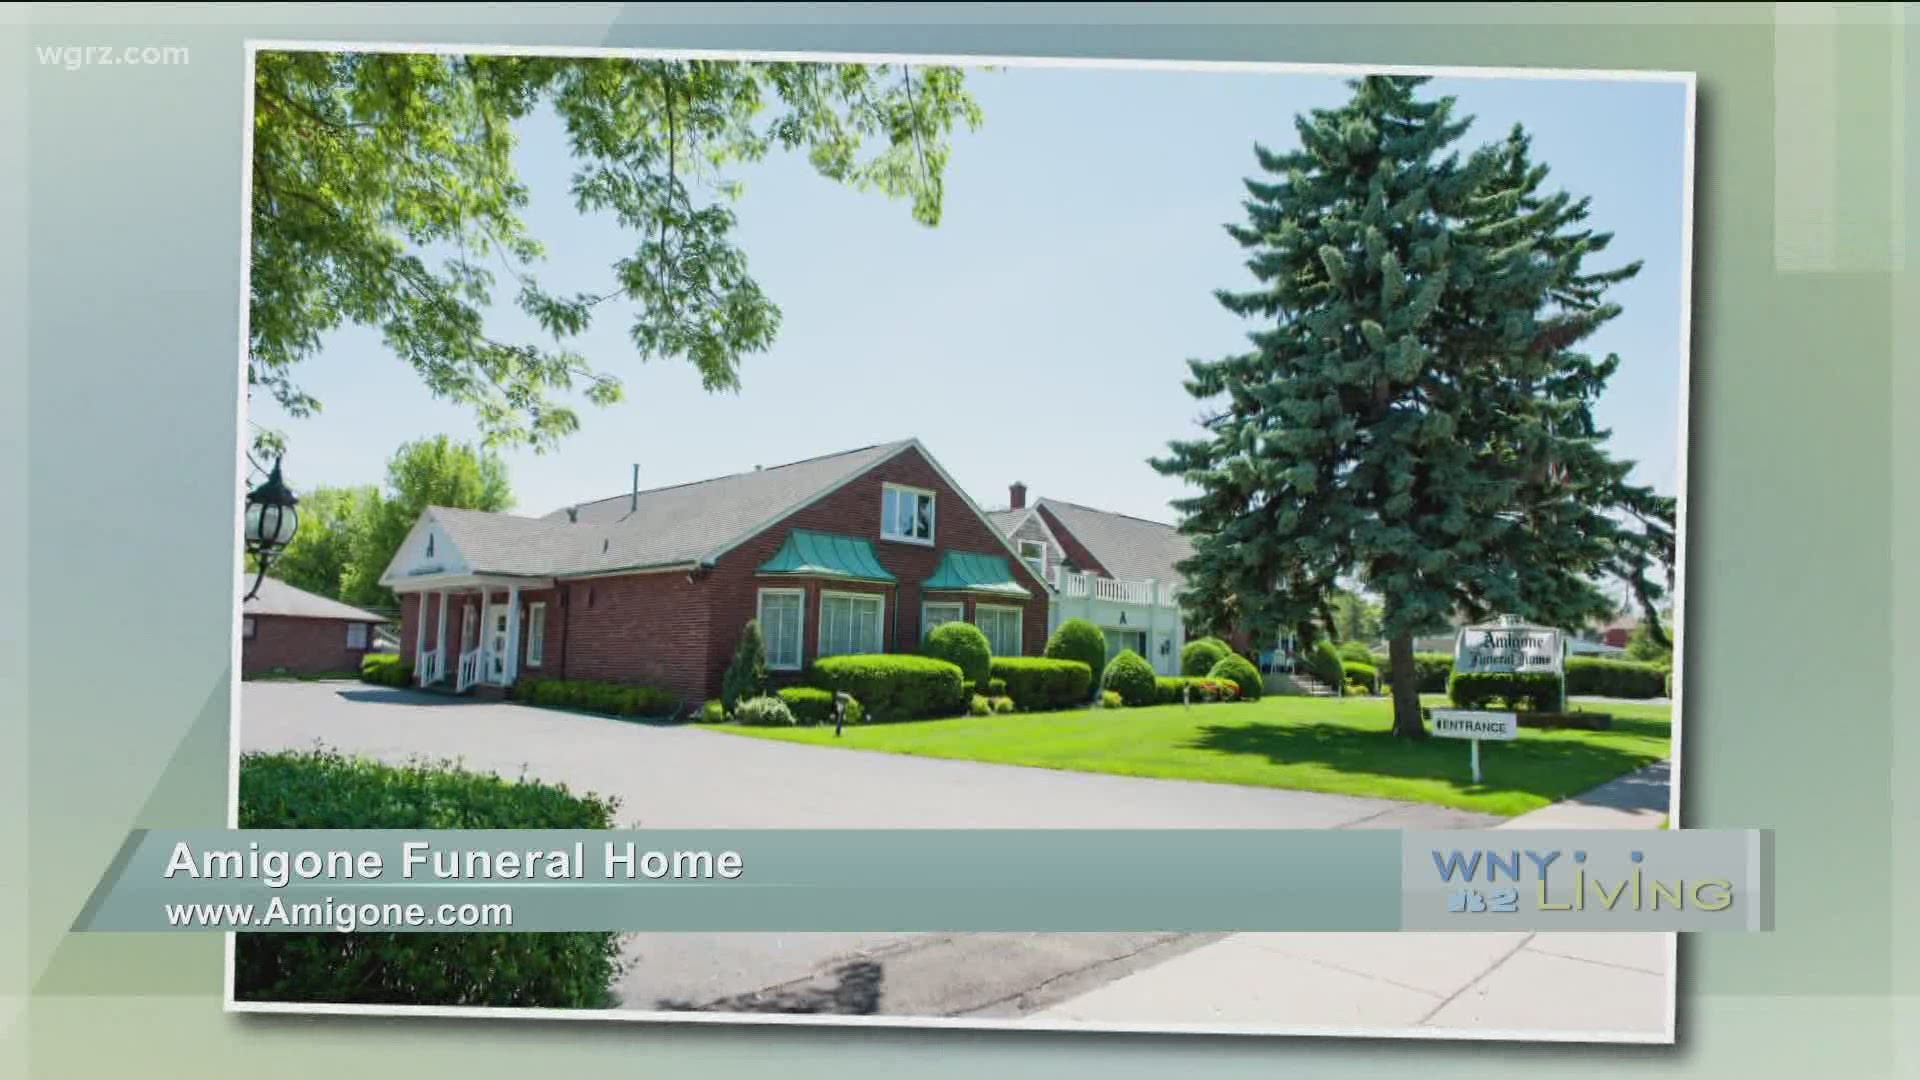 WNY Living - August 1 - Amigone Funeral Home (THIS VIDEO IS SPONSORED BY AMIGONE FUNERAL HOME)